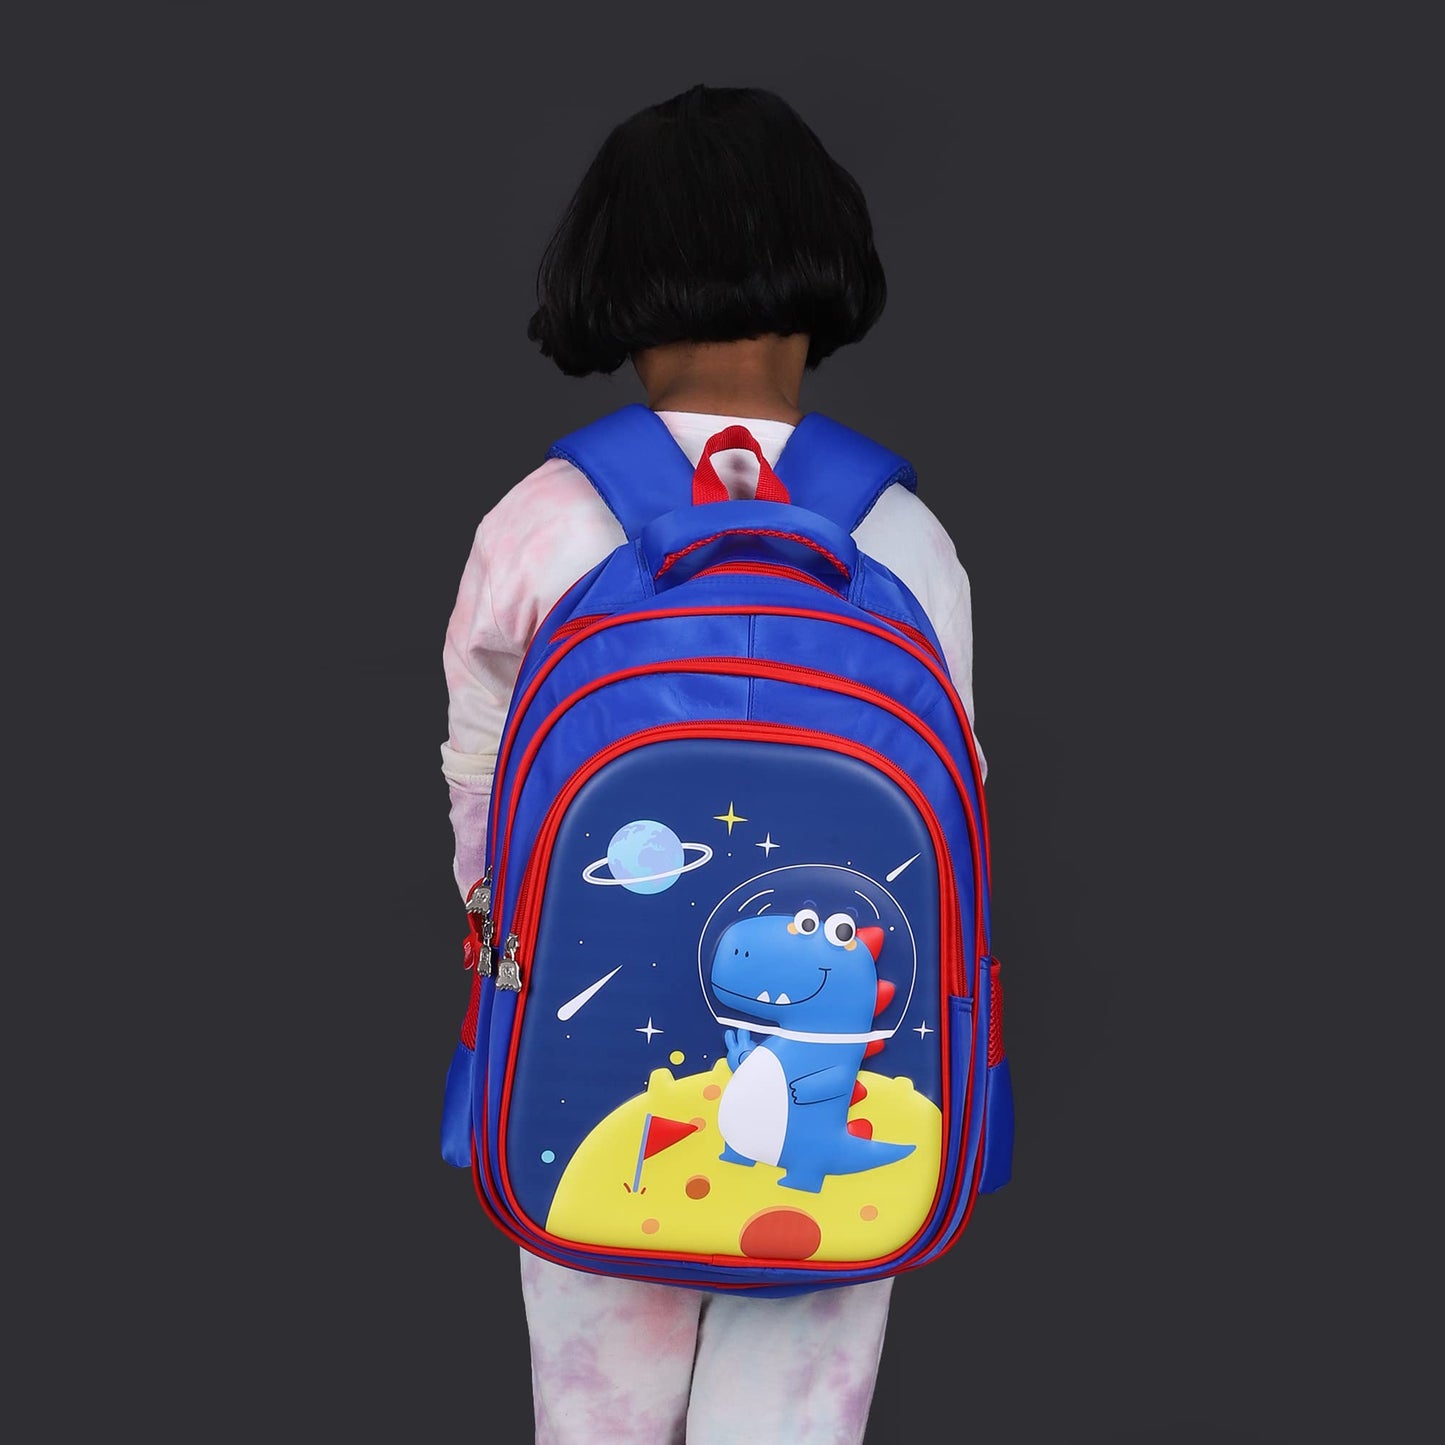 THE CLOWNFISH Kidventure Series Polyester 23 Litres Kids Standard Backpack School Bag Daypack Sack Picnic Bag For Tiny Tots Child Age 5-7 Years (Royal Blue), 23 Litre